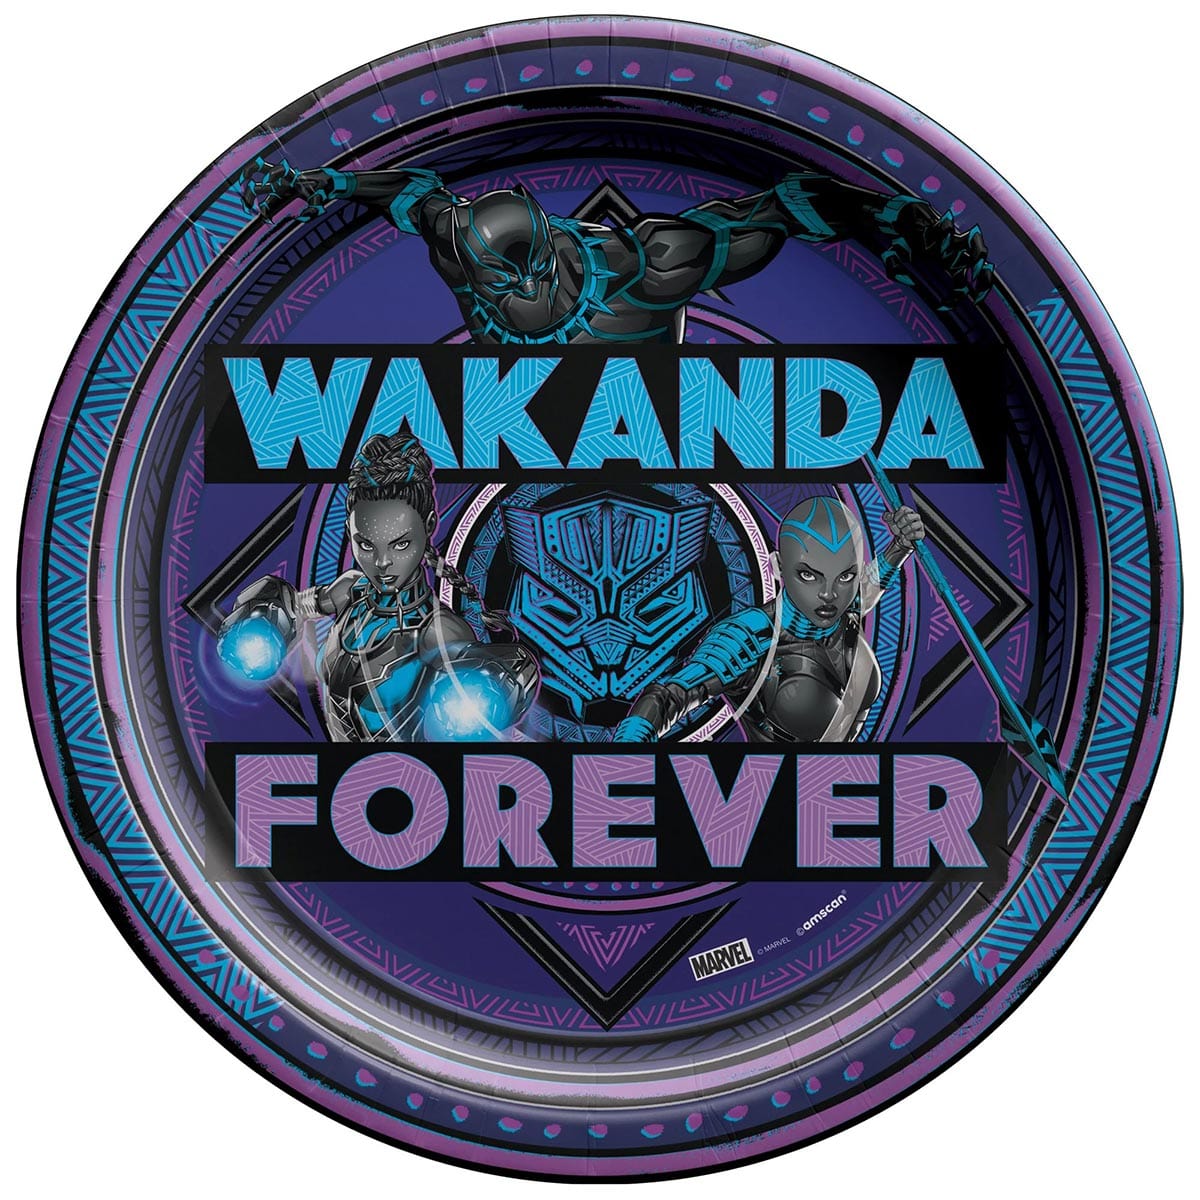 AMSCAN CA Kids Birthday Marvel Avengers Black Panther Wakanda Forever Birthday Large Round Lunch Paper Plates, 9 Inches, 8 Count